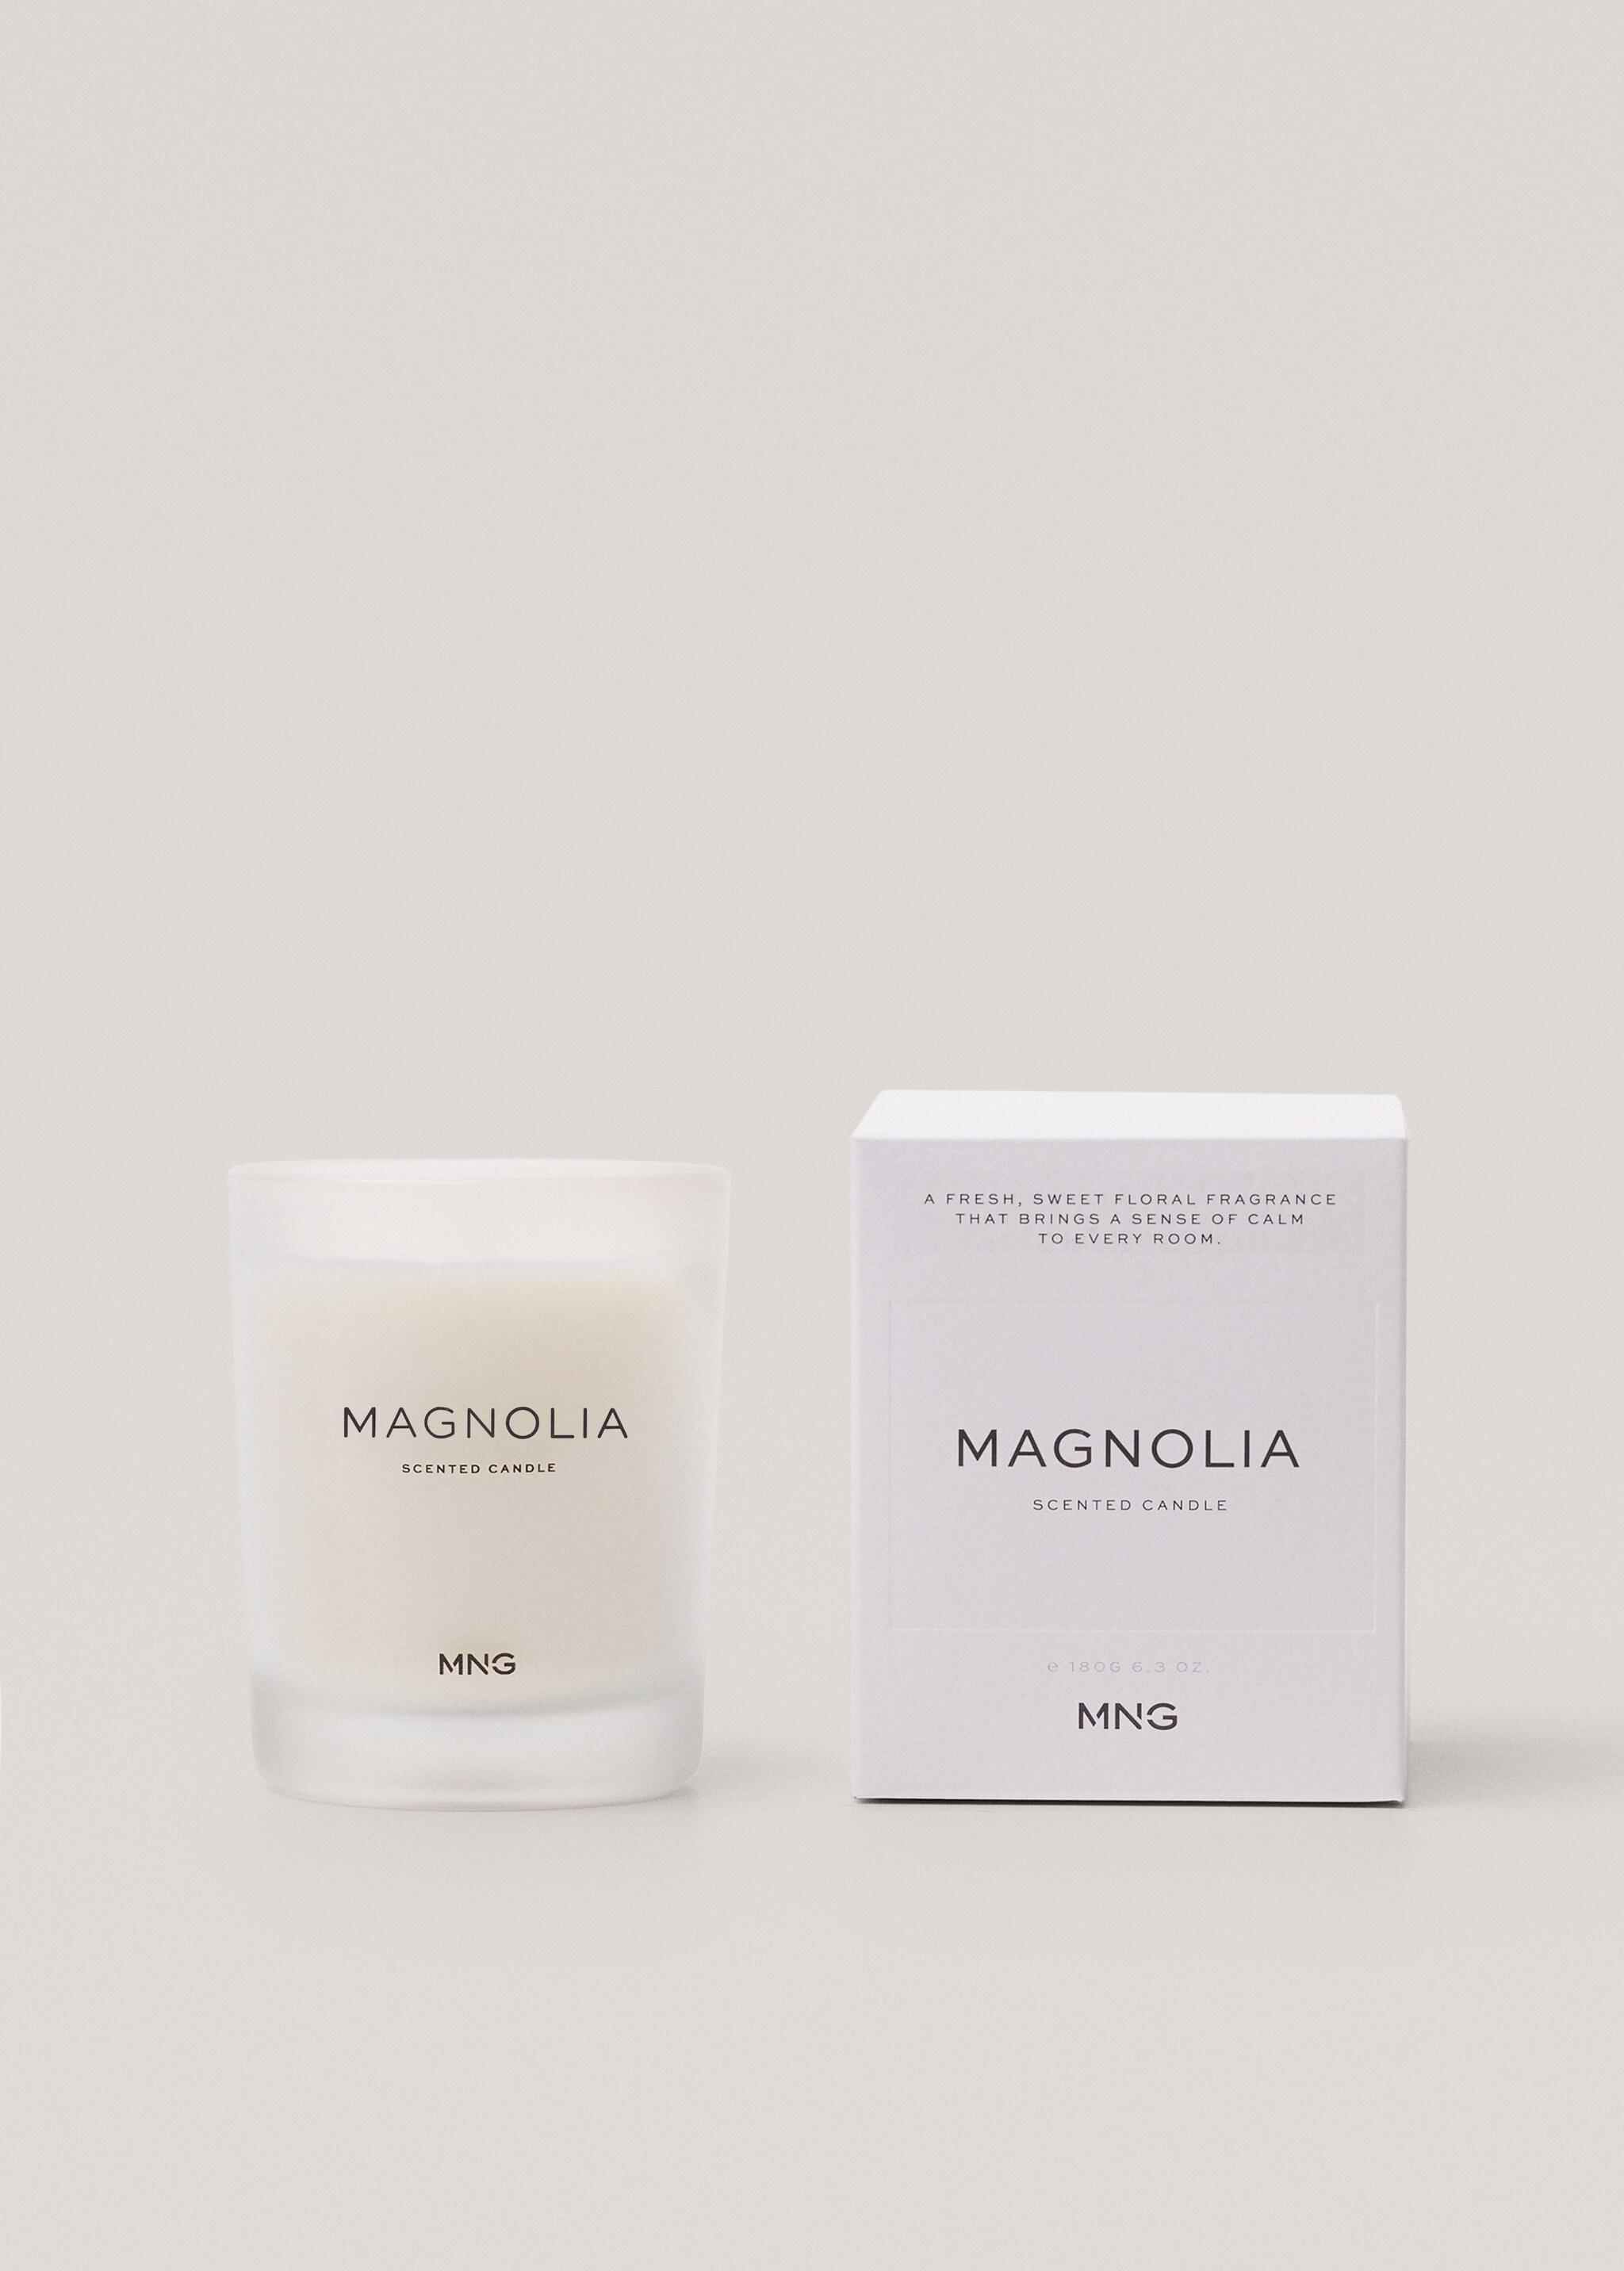 Magnolia scented candle  - Article without model